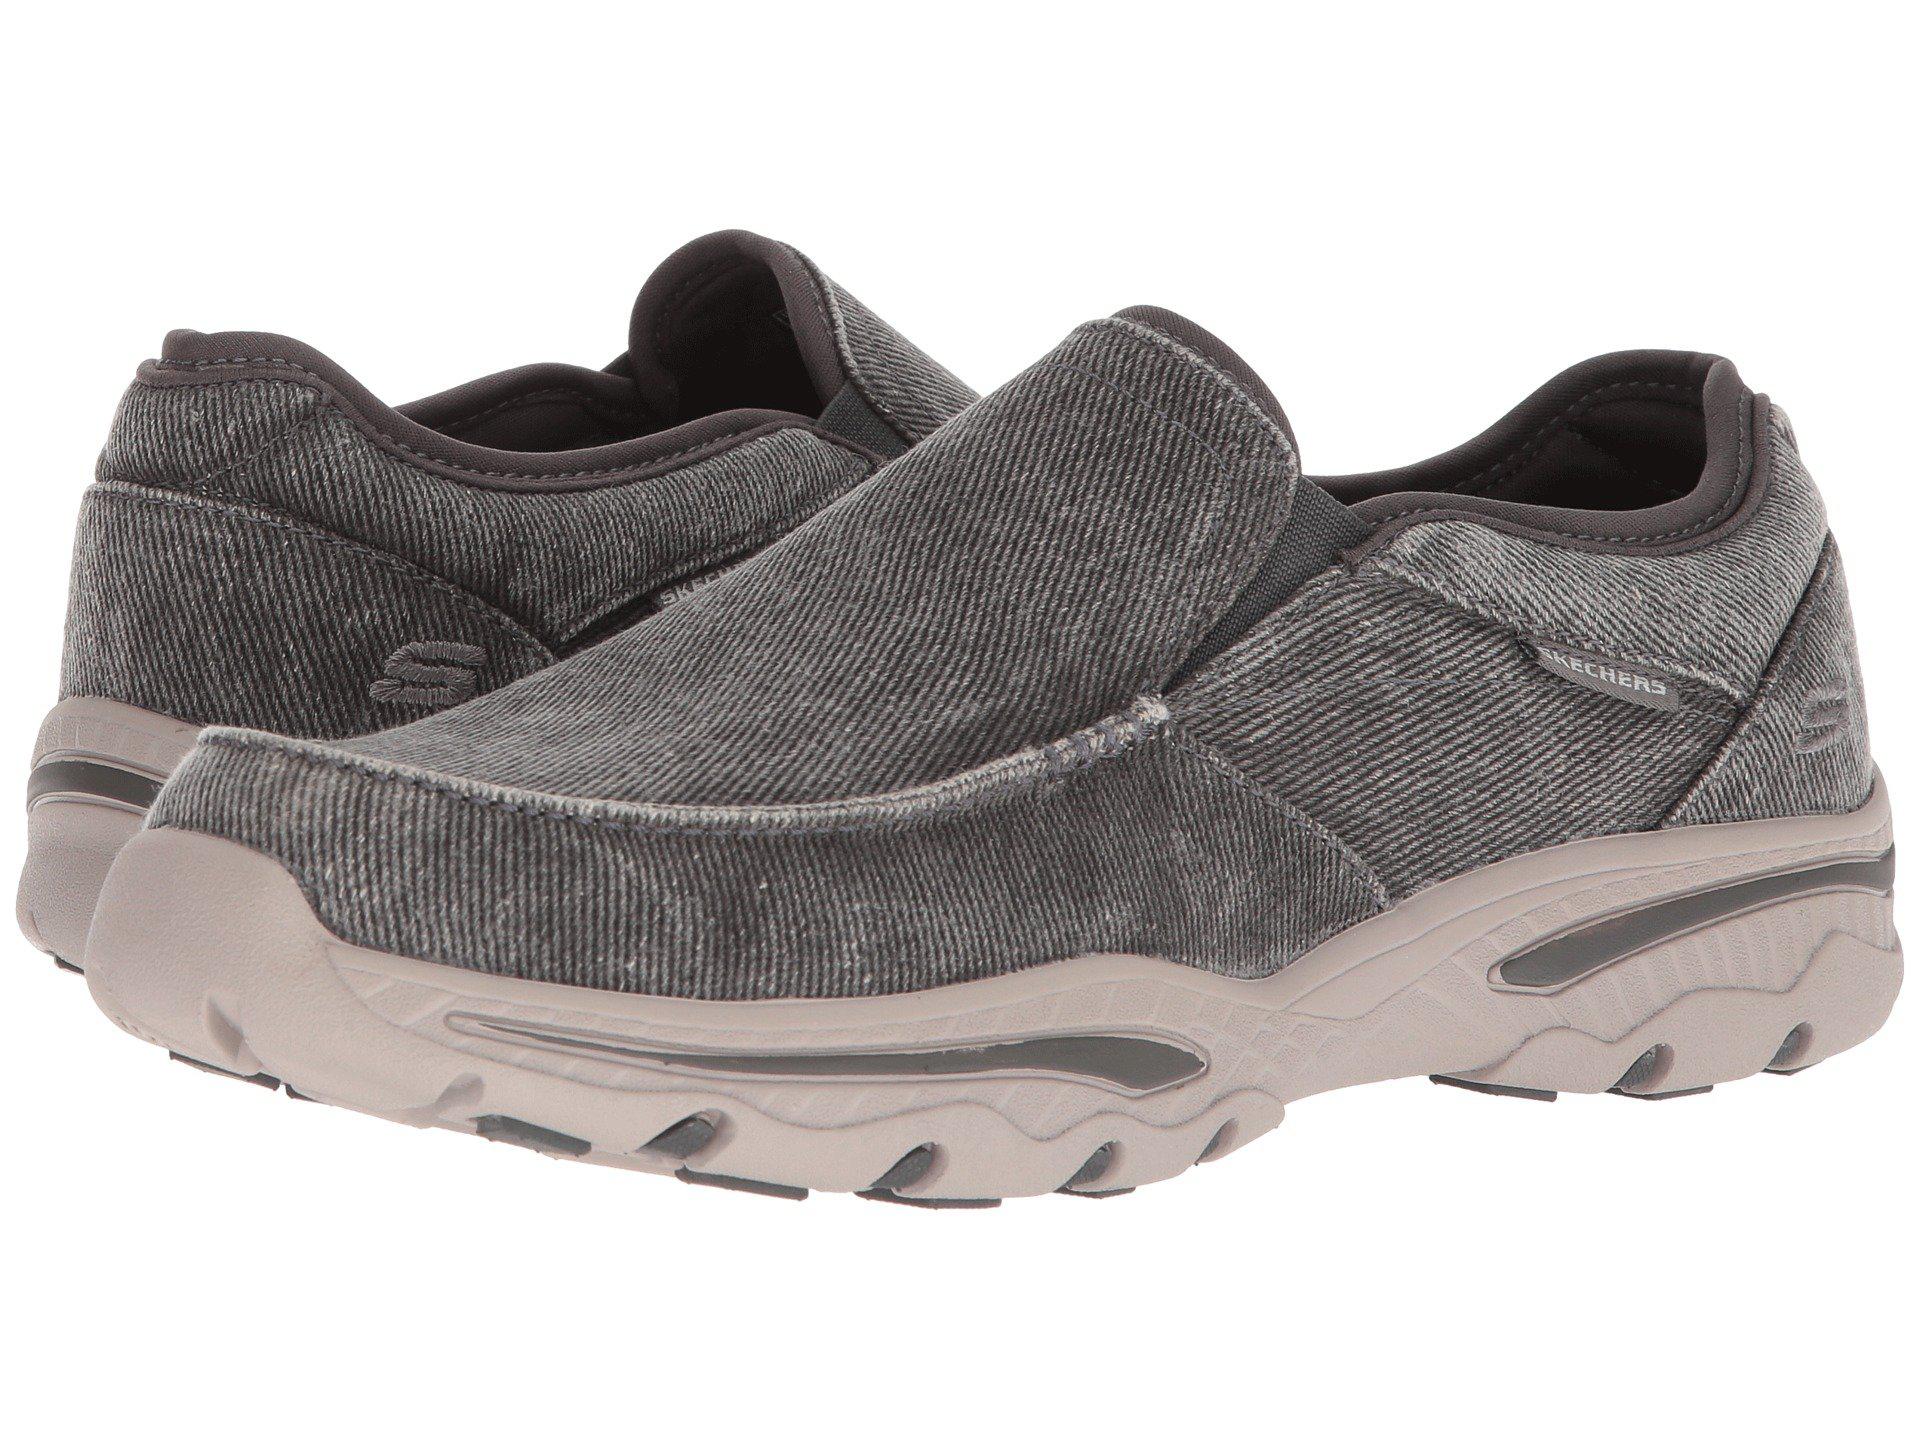 Lyst - Skechers 65355 Moccasins in Gray for Men - Save 9.090909090909093%